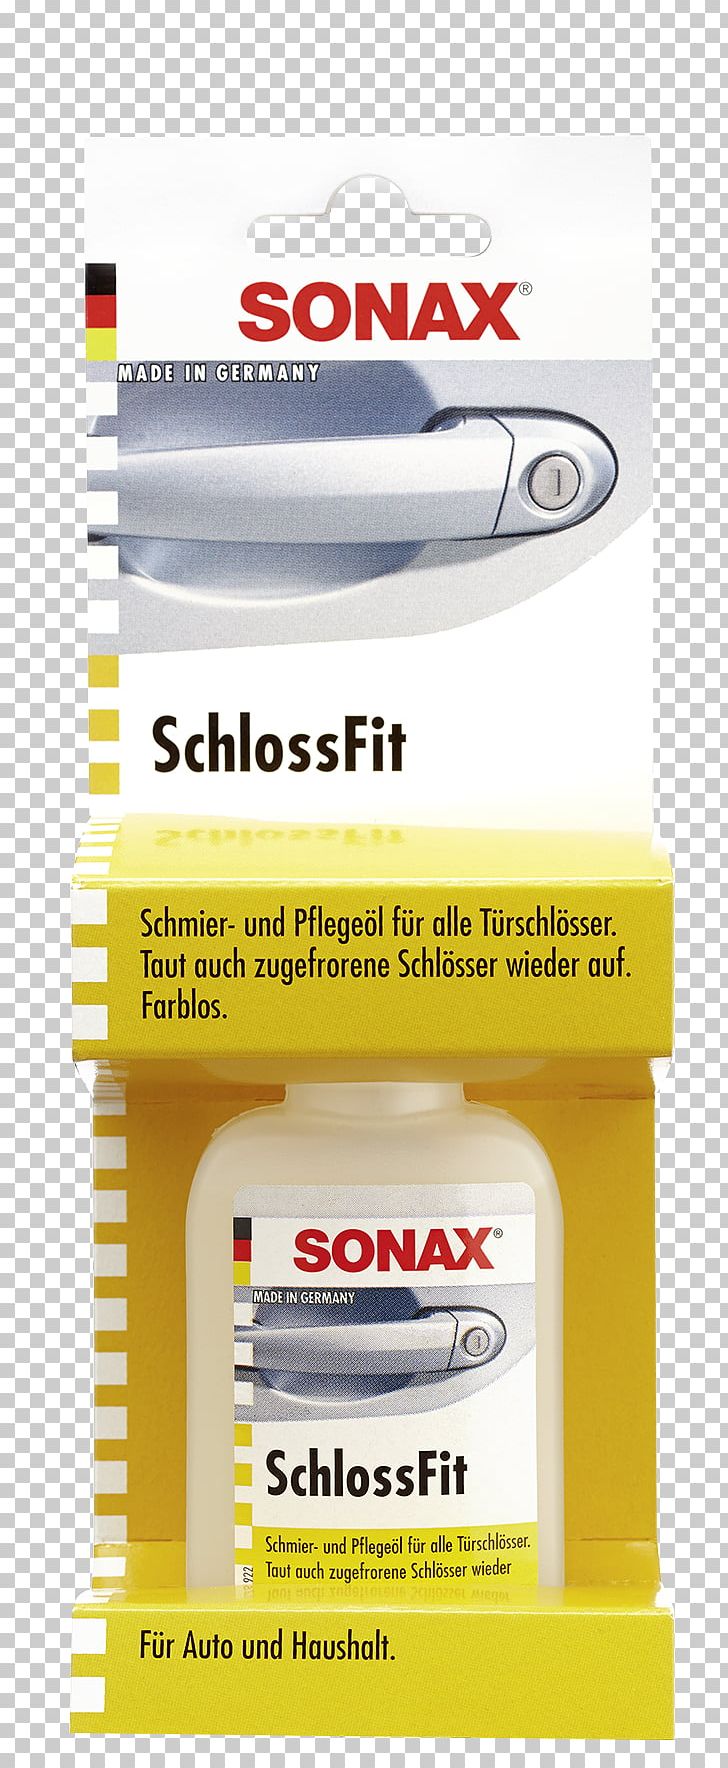 Sonax Chimitex Milliliter Austria 02325-050 PNG, Clipart, Austria, Brand, Concentrate, Conflagration, Milliliter Free PNG Download